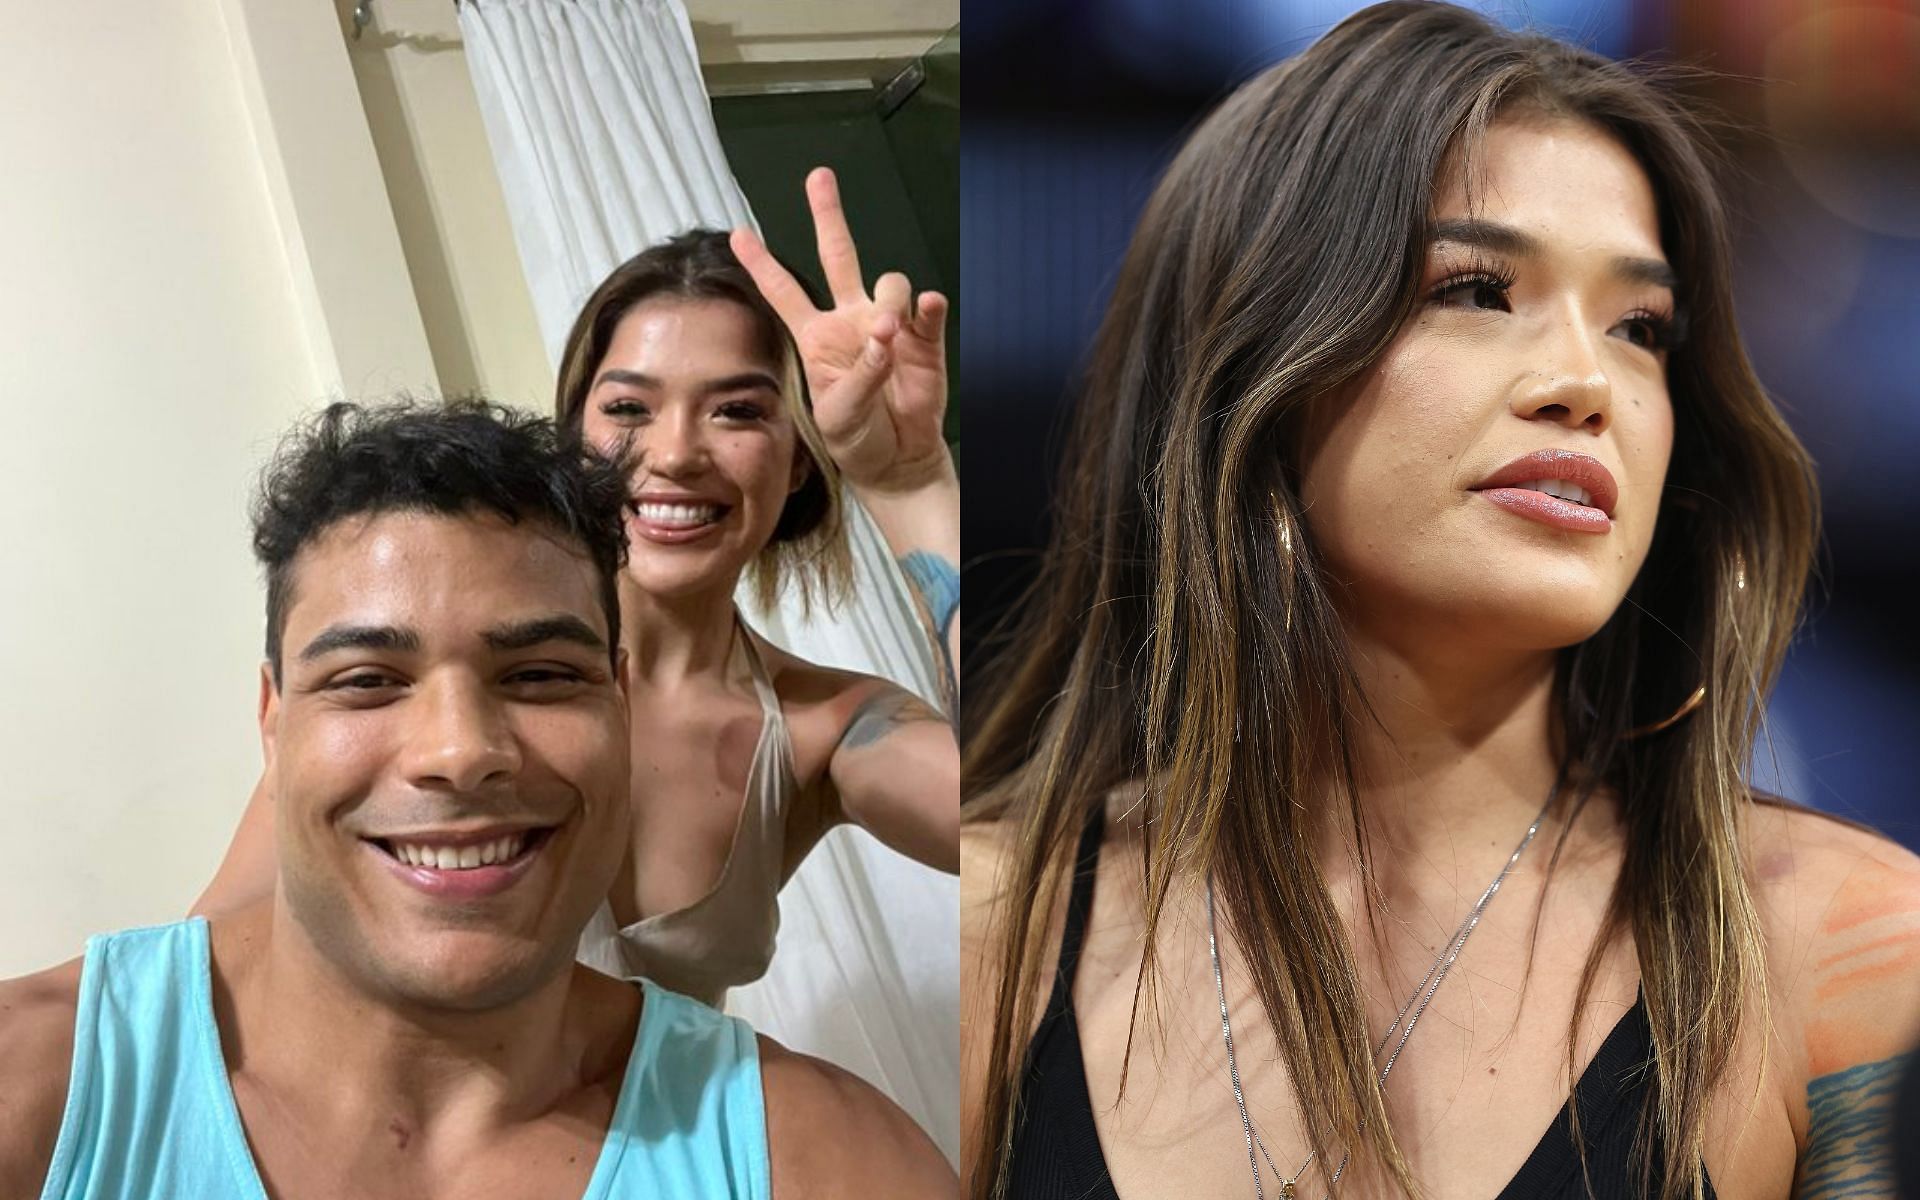 Paulo Costa with Tracy Cortez (left) and Tracy Cortez (right) (Image credits Getty Images and @BorrachinhaMMA on Twitter)